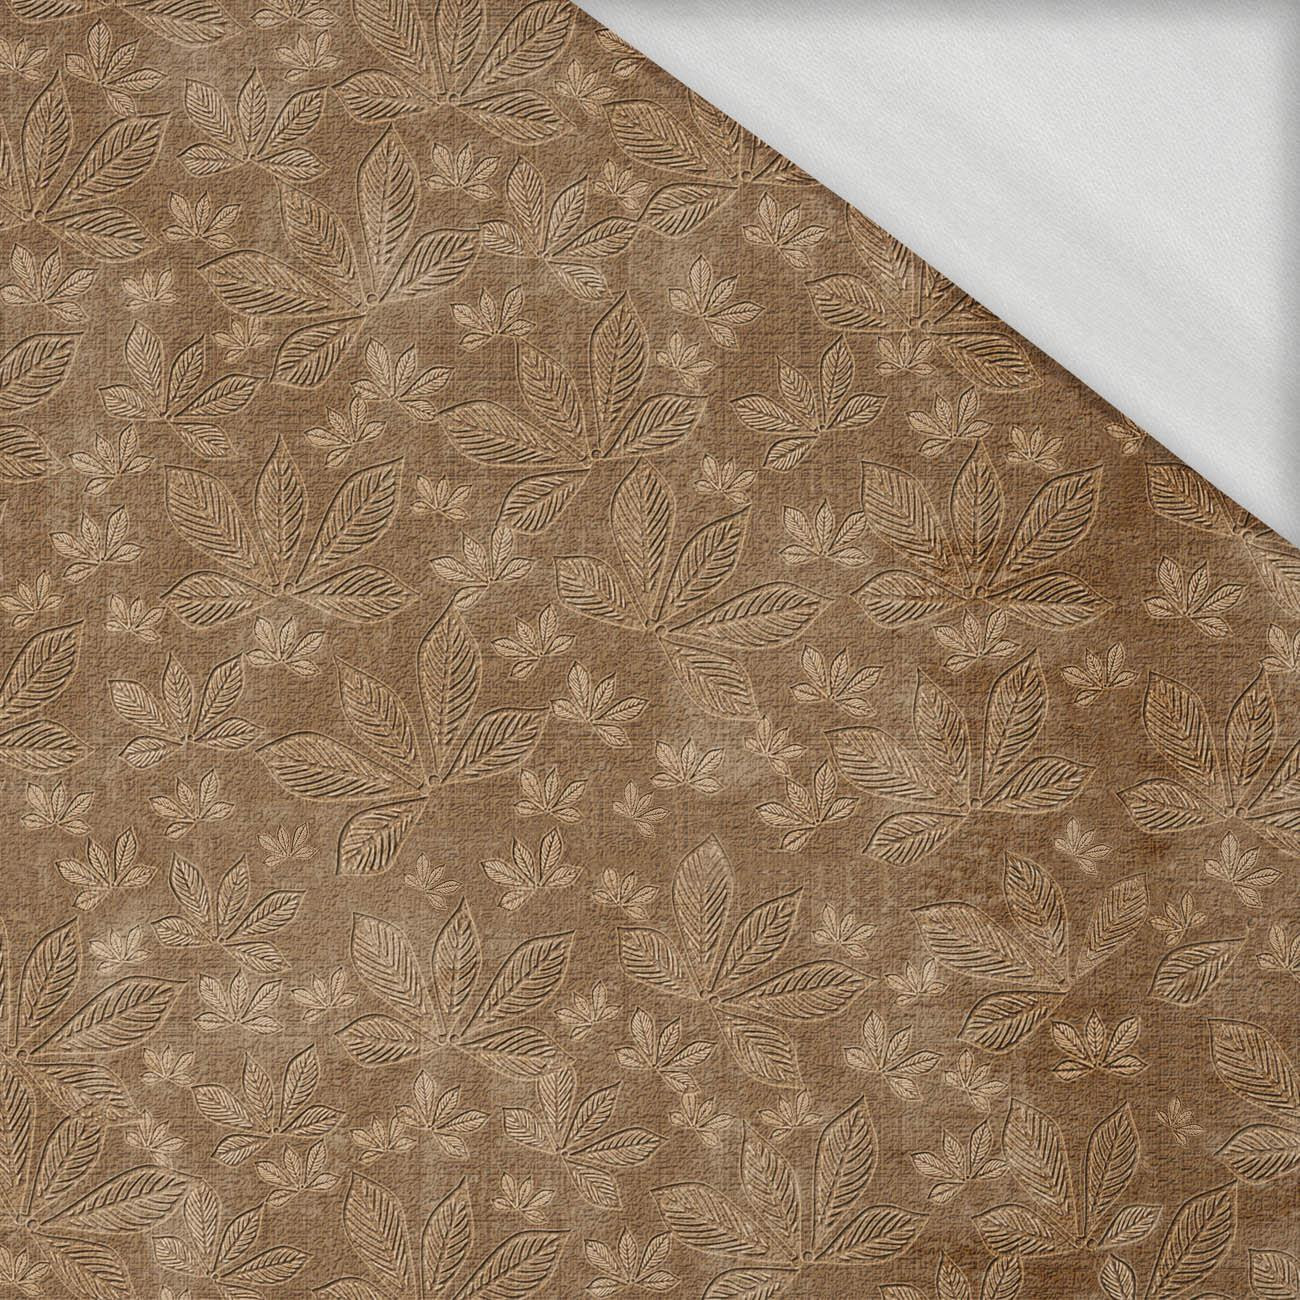 CHESTNUT LEAVES Ms.2 / brown (AUTUMN COLORS) - looped knit fabric